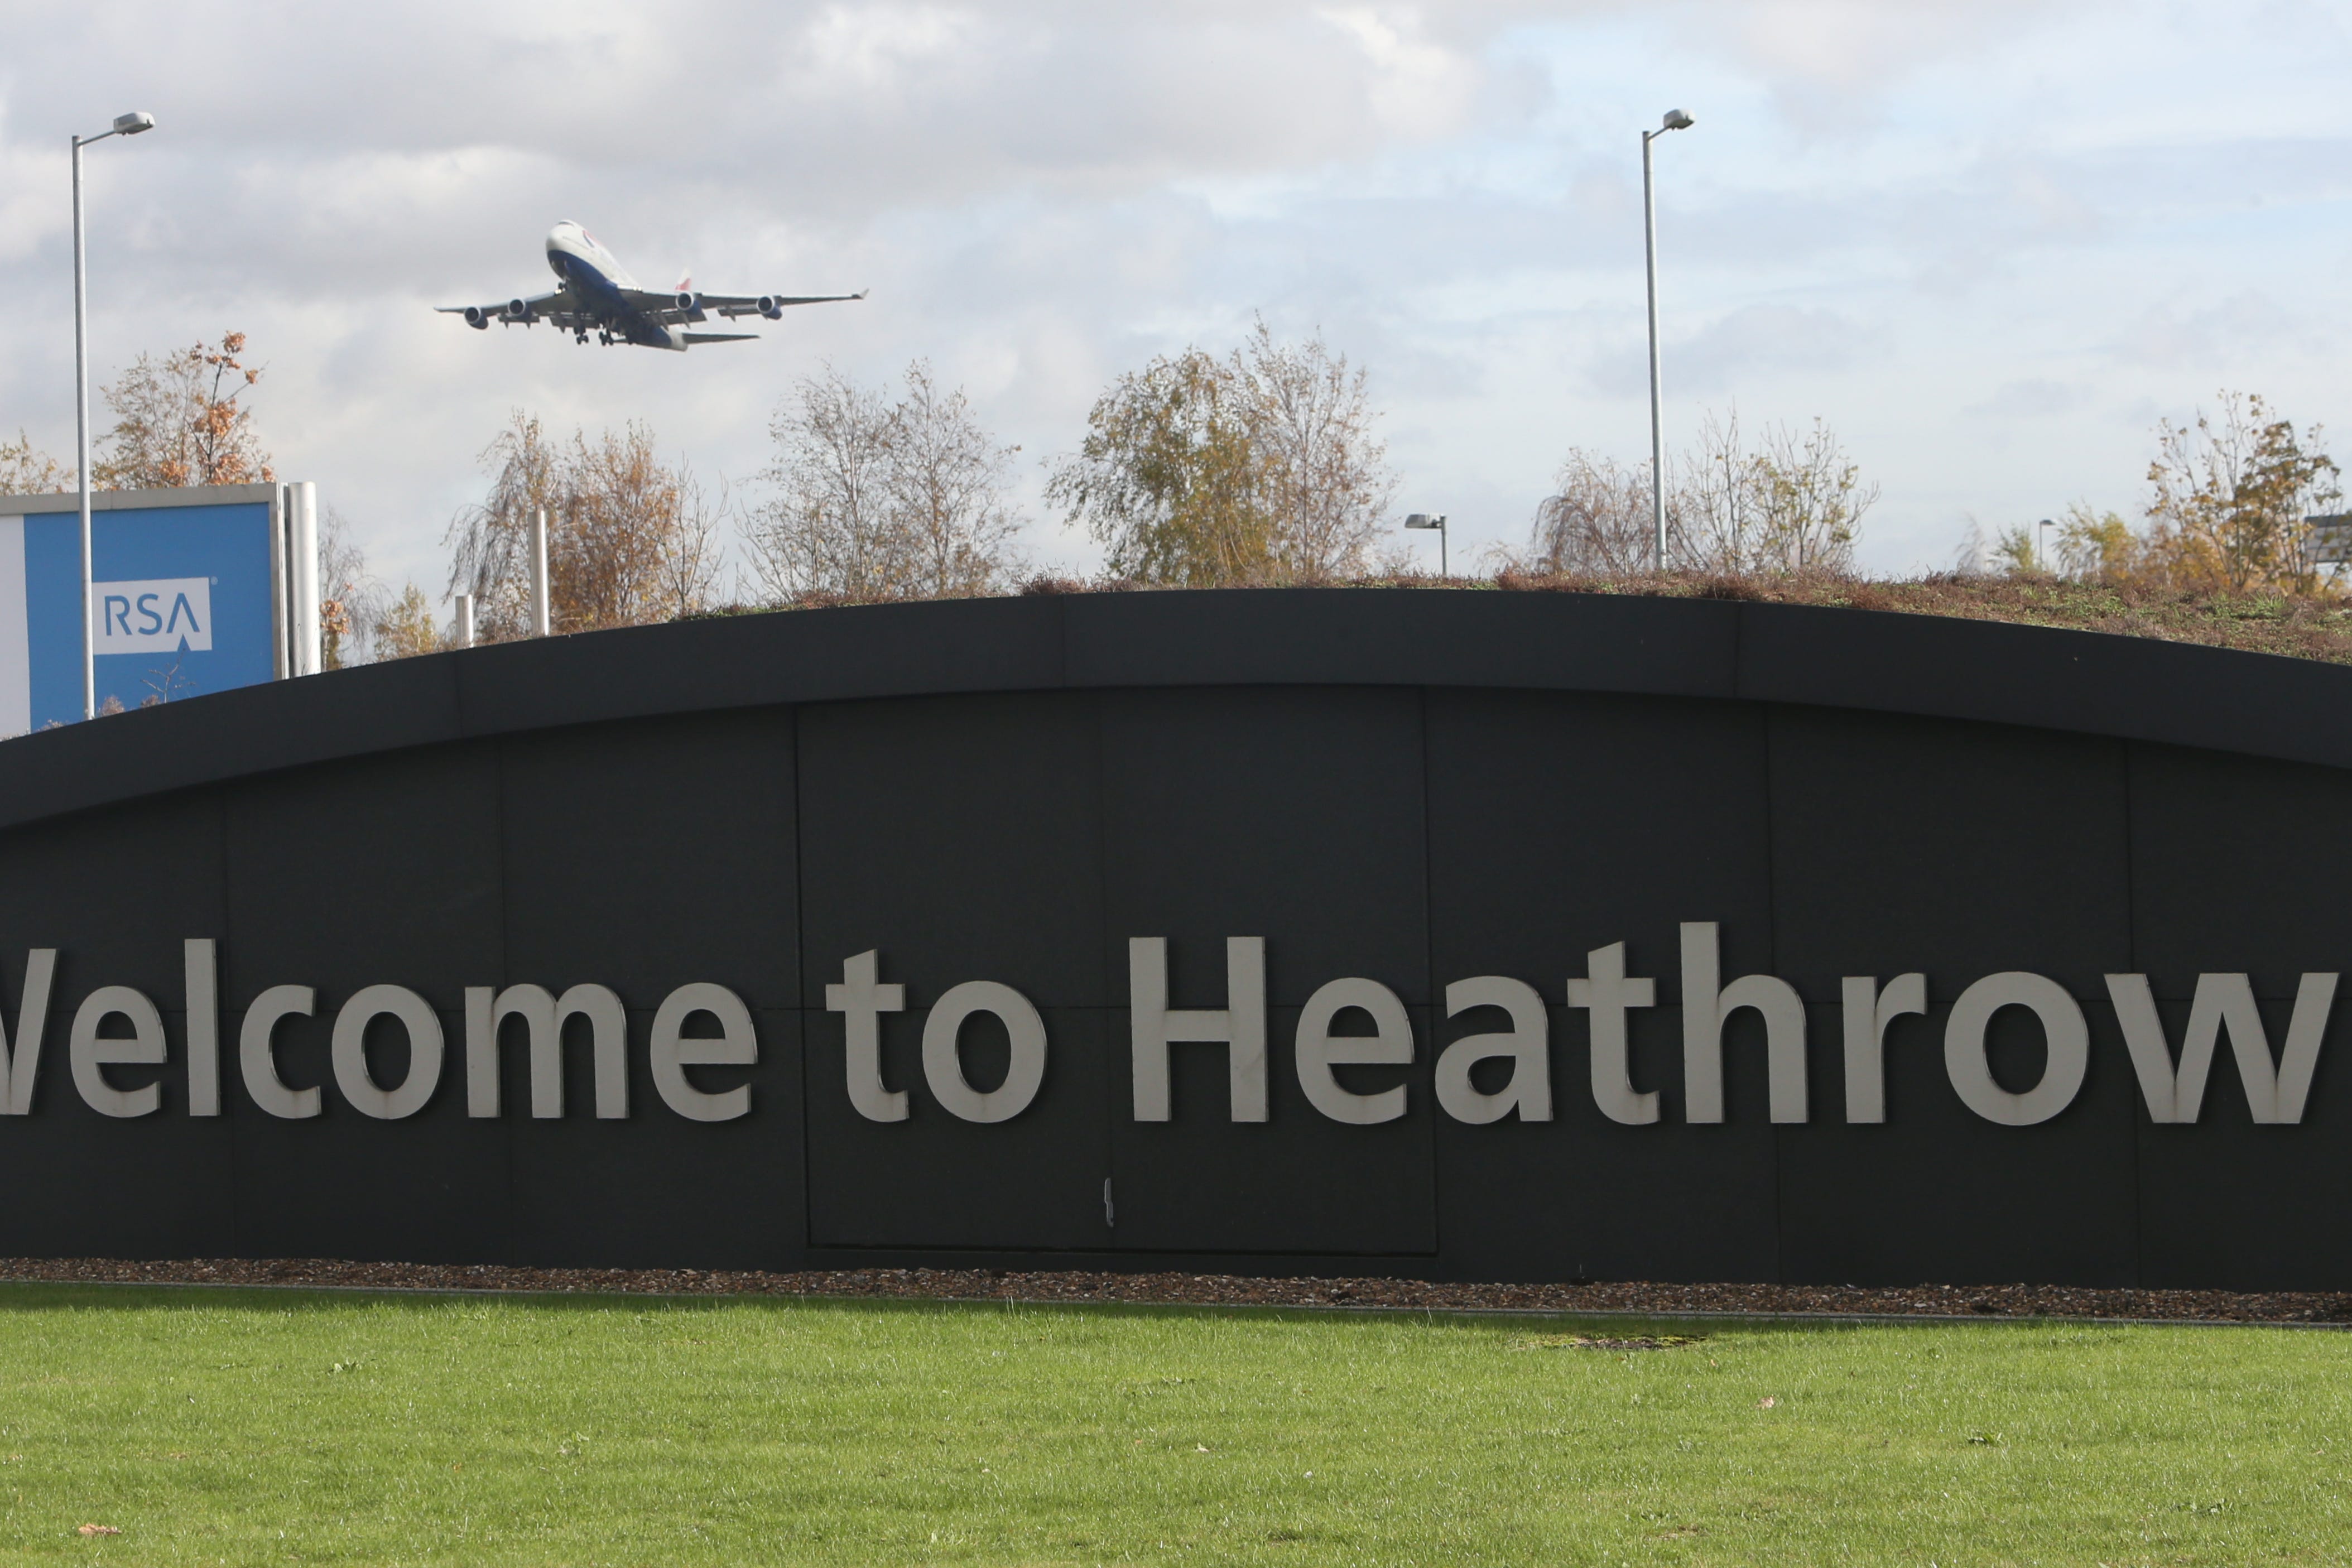 An investigation was launched after a number of thefts from a car park at Heathrow (Steve Parsons/PA)